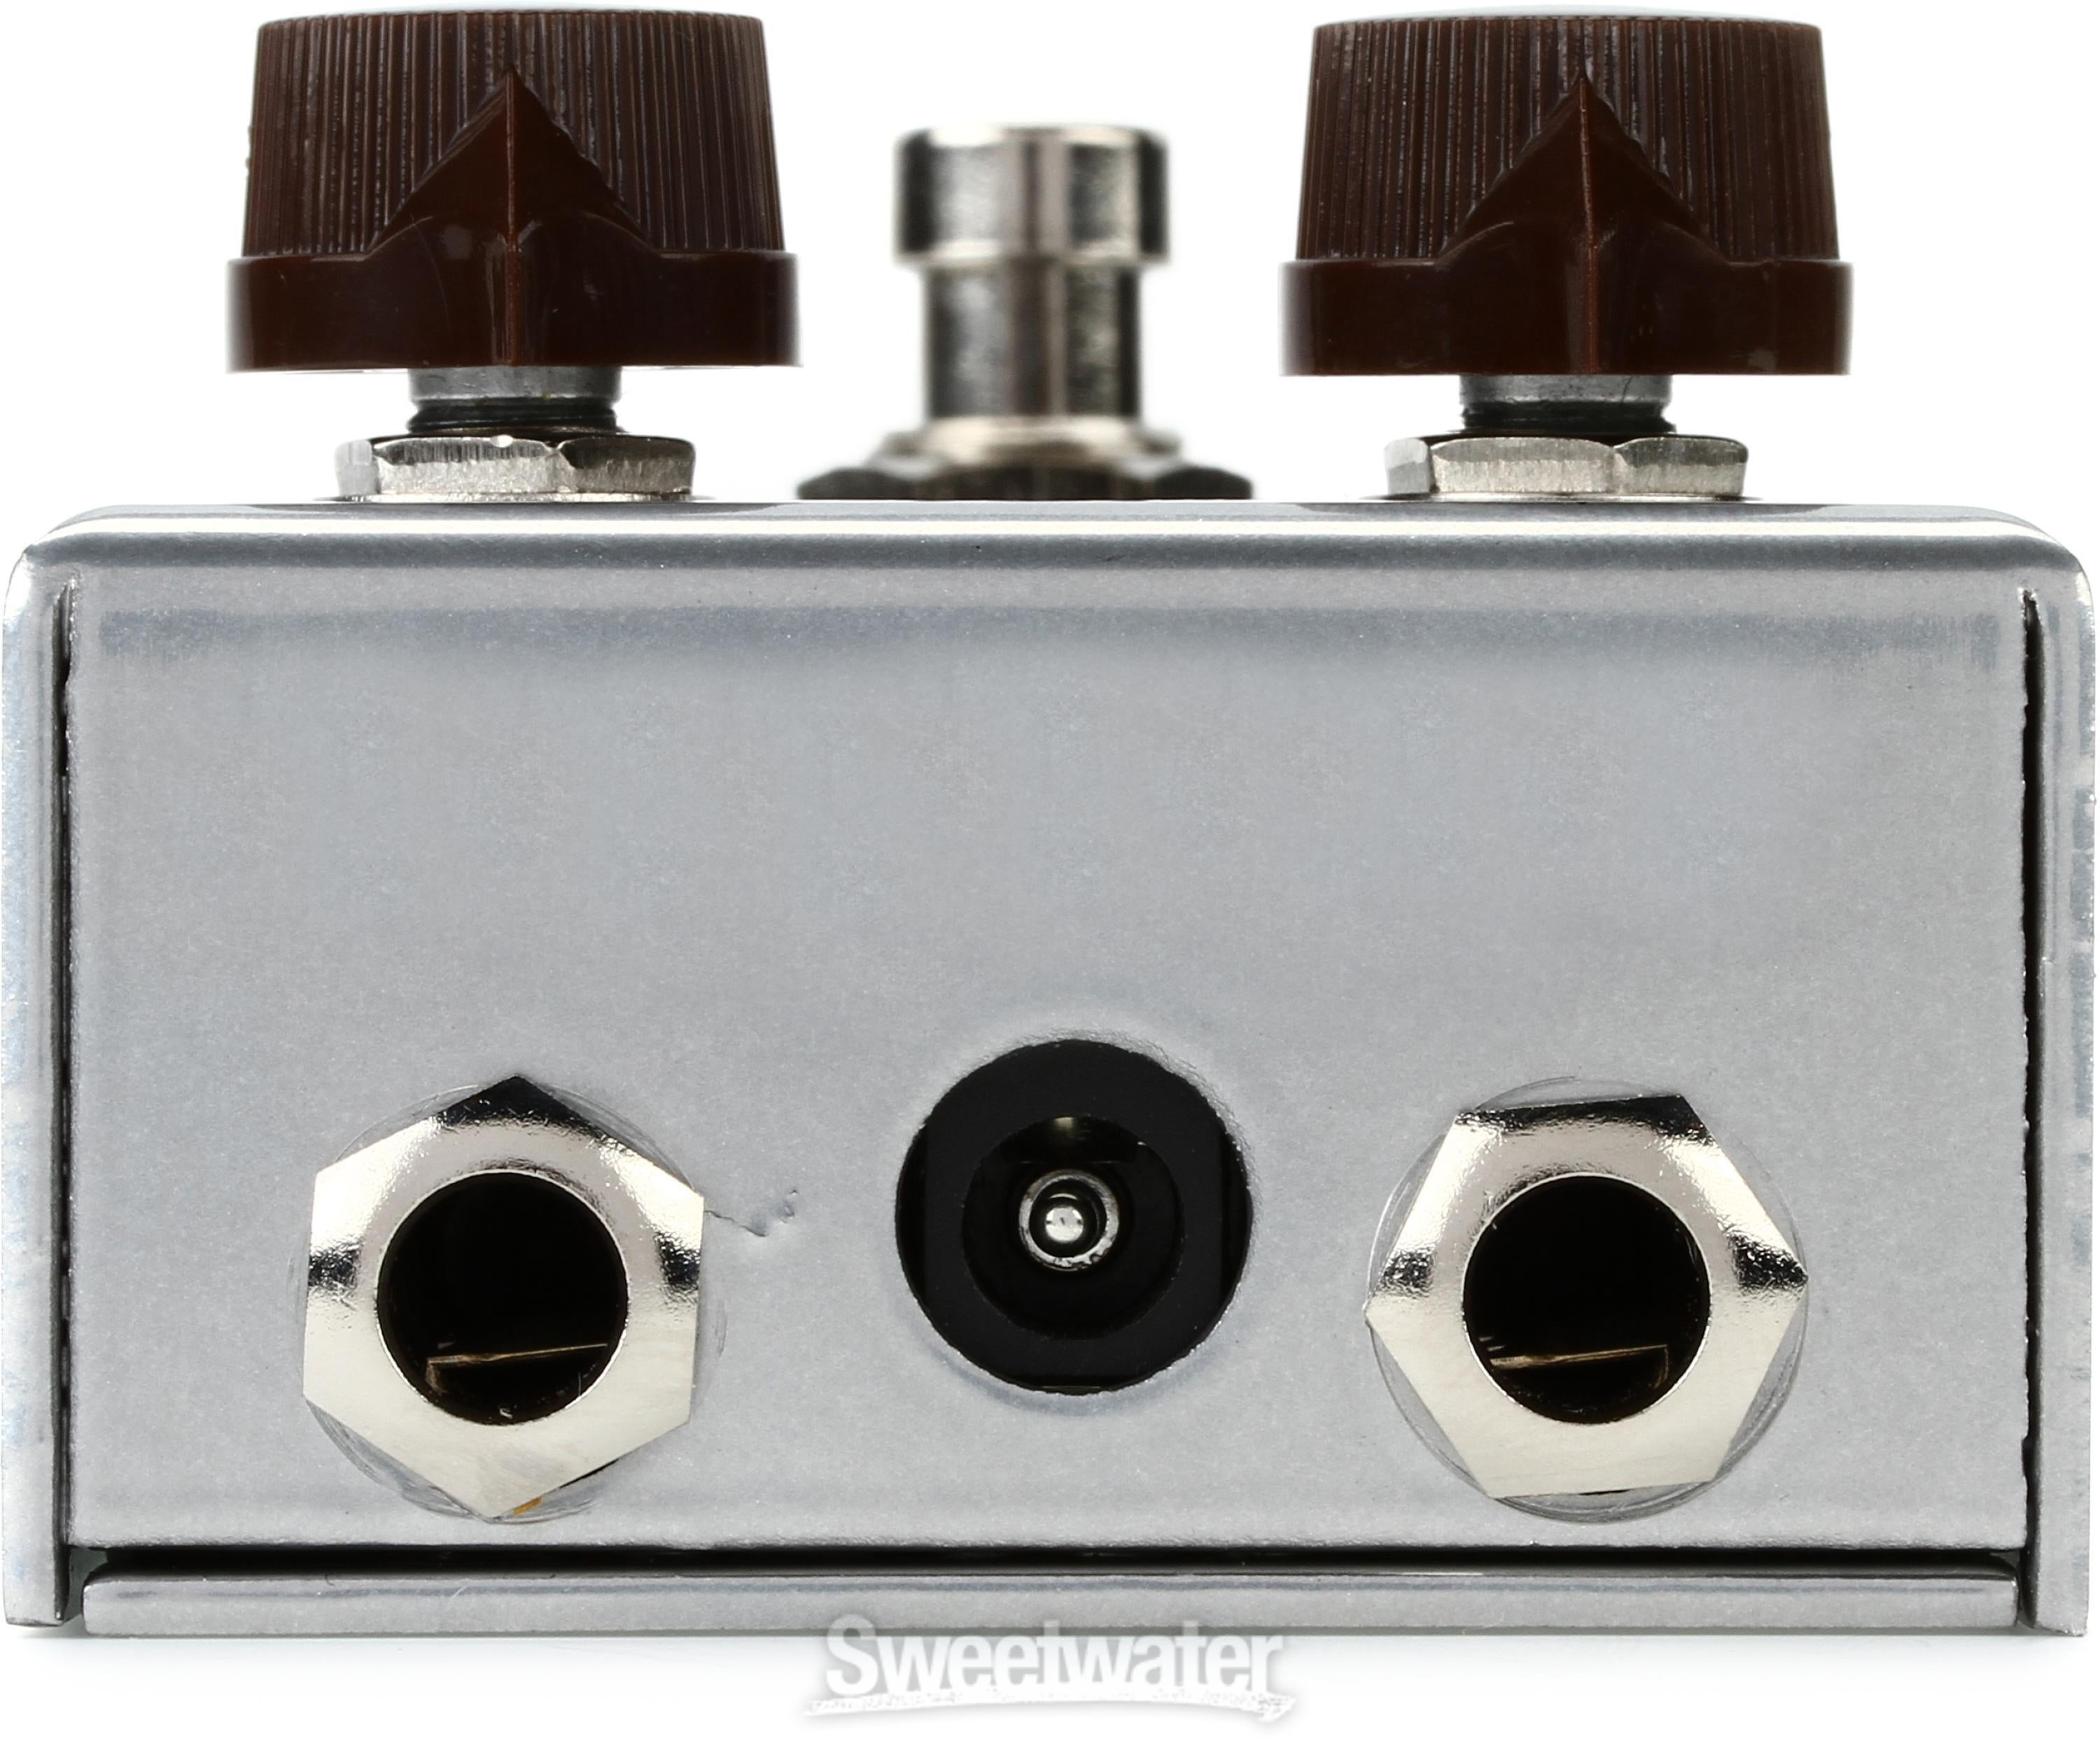 J. Rockett Audio Designs Lenny Boost/Overdrive Pedal Reviews | Sweetwater